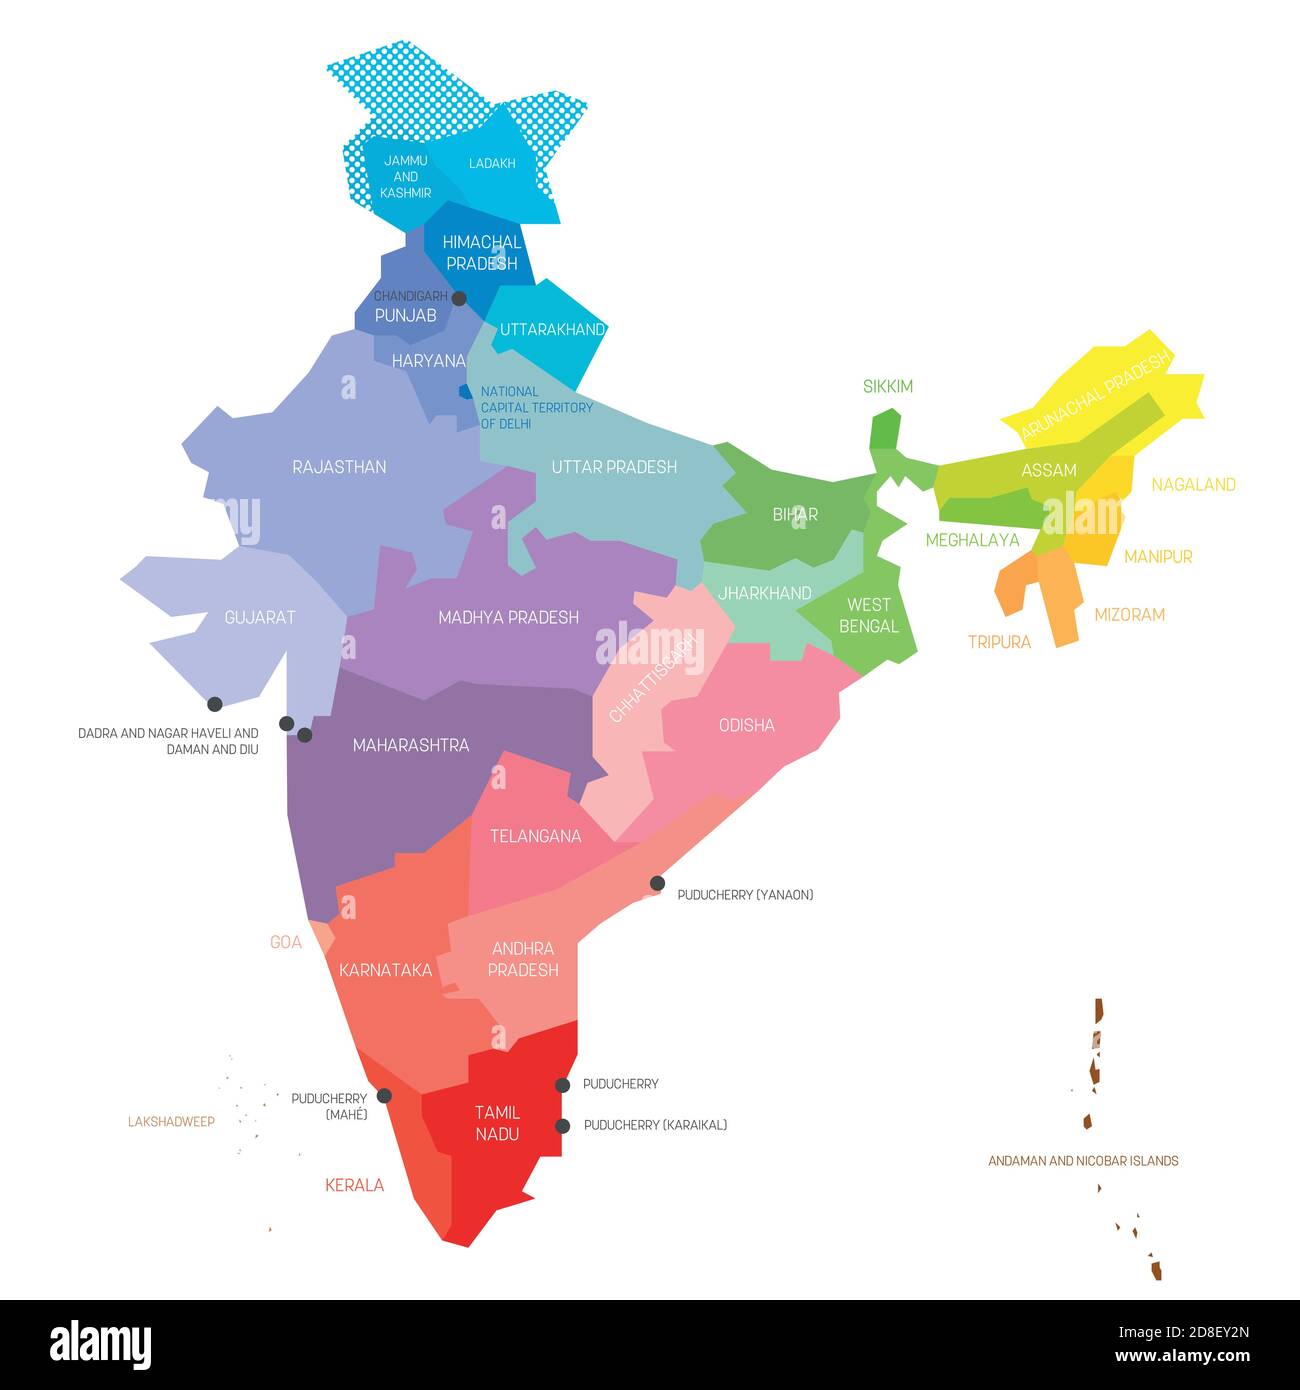 Colorful political map of India. Administrative divisions - states and union territories. Simple flat vector map with labels. Stock Vector